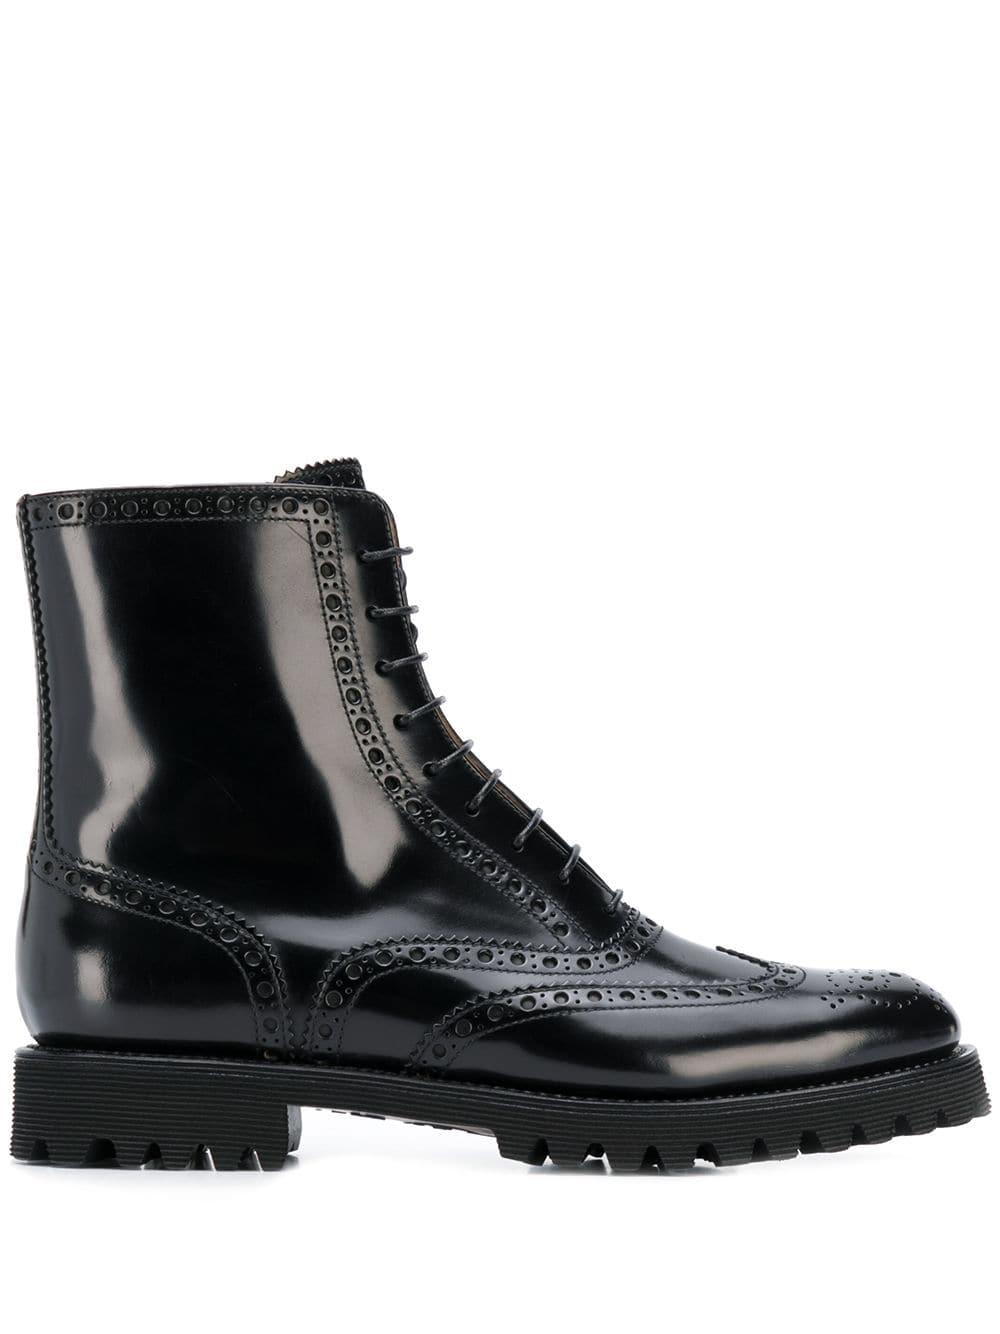 Church's Leather Brogue Boots in Black - Lyst